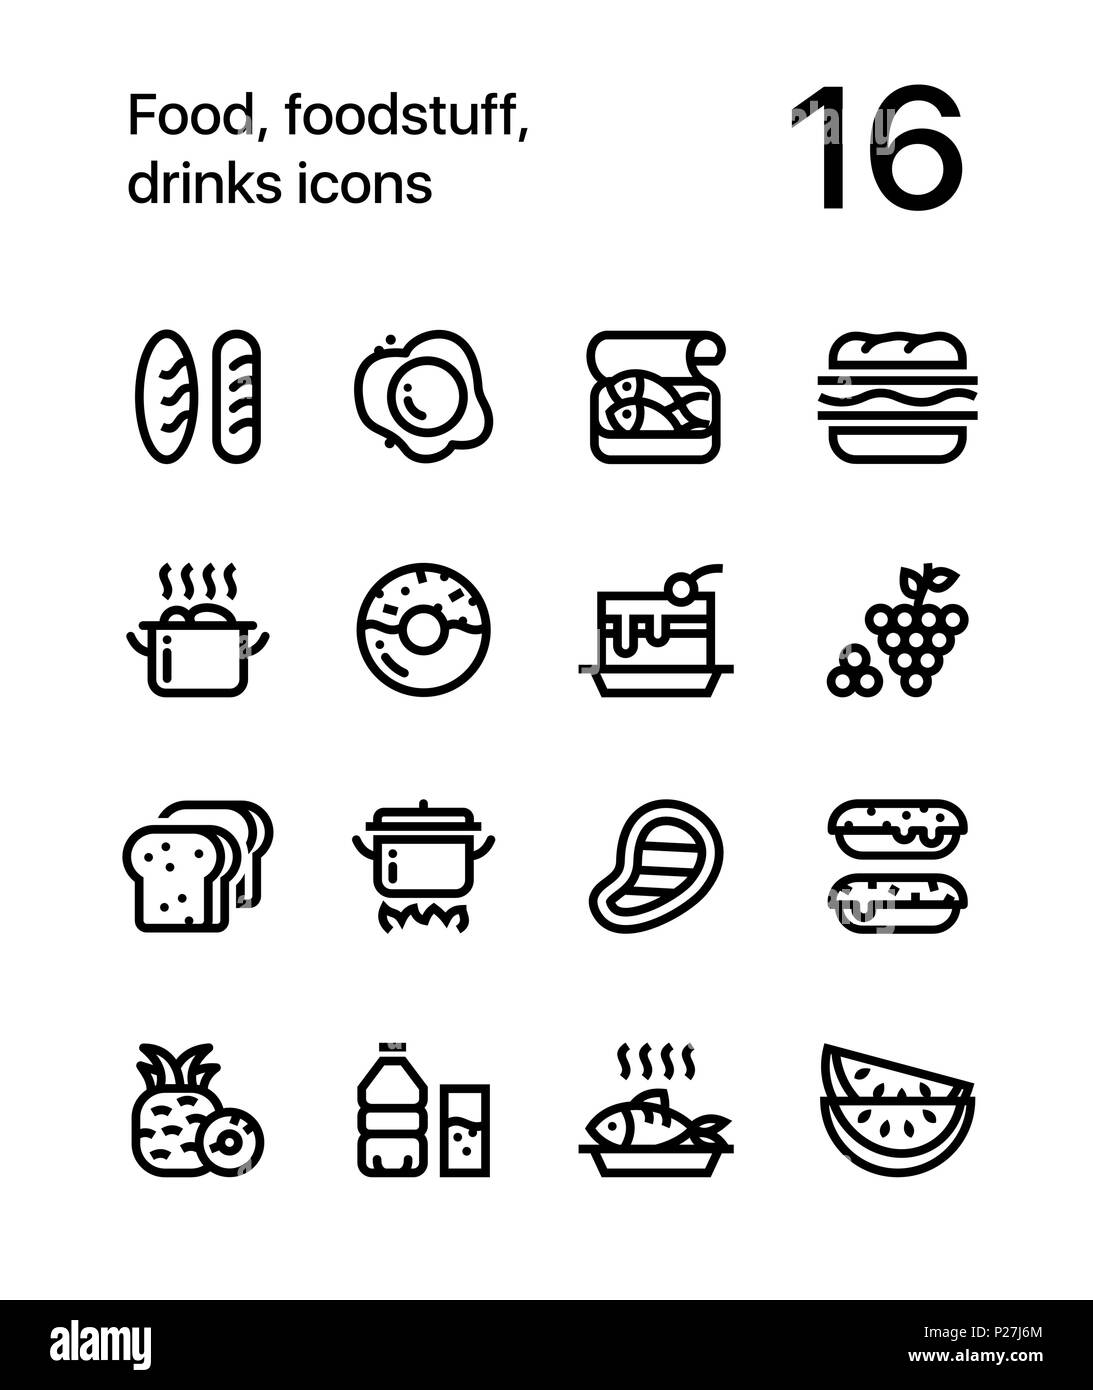 Food, foodstuff, drinks icons for web and mobile design pack 1 Stock Vector